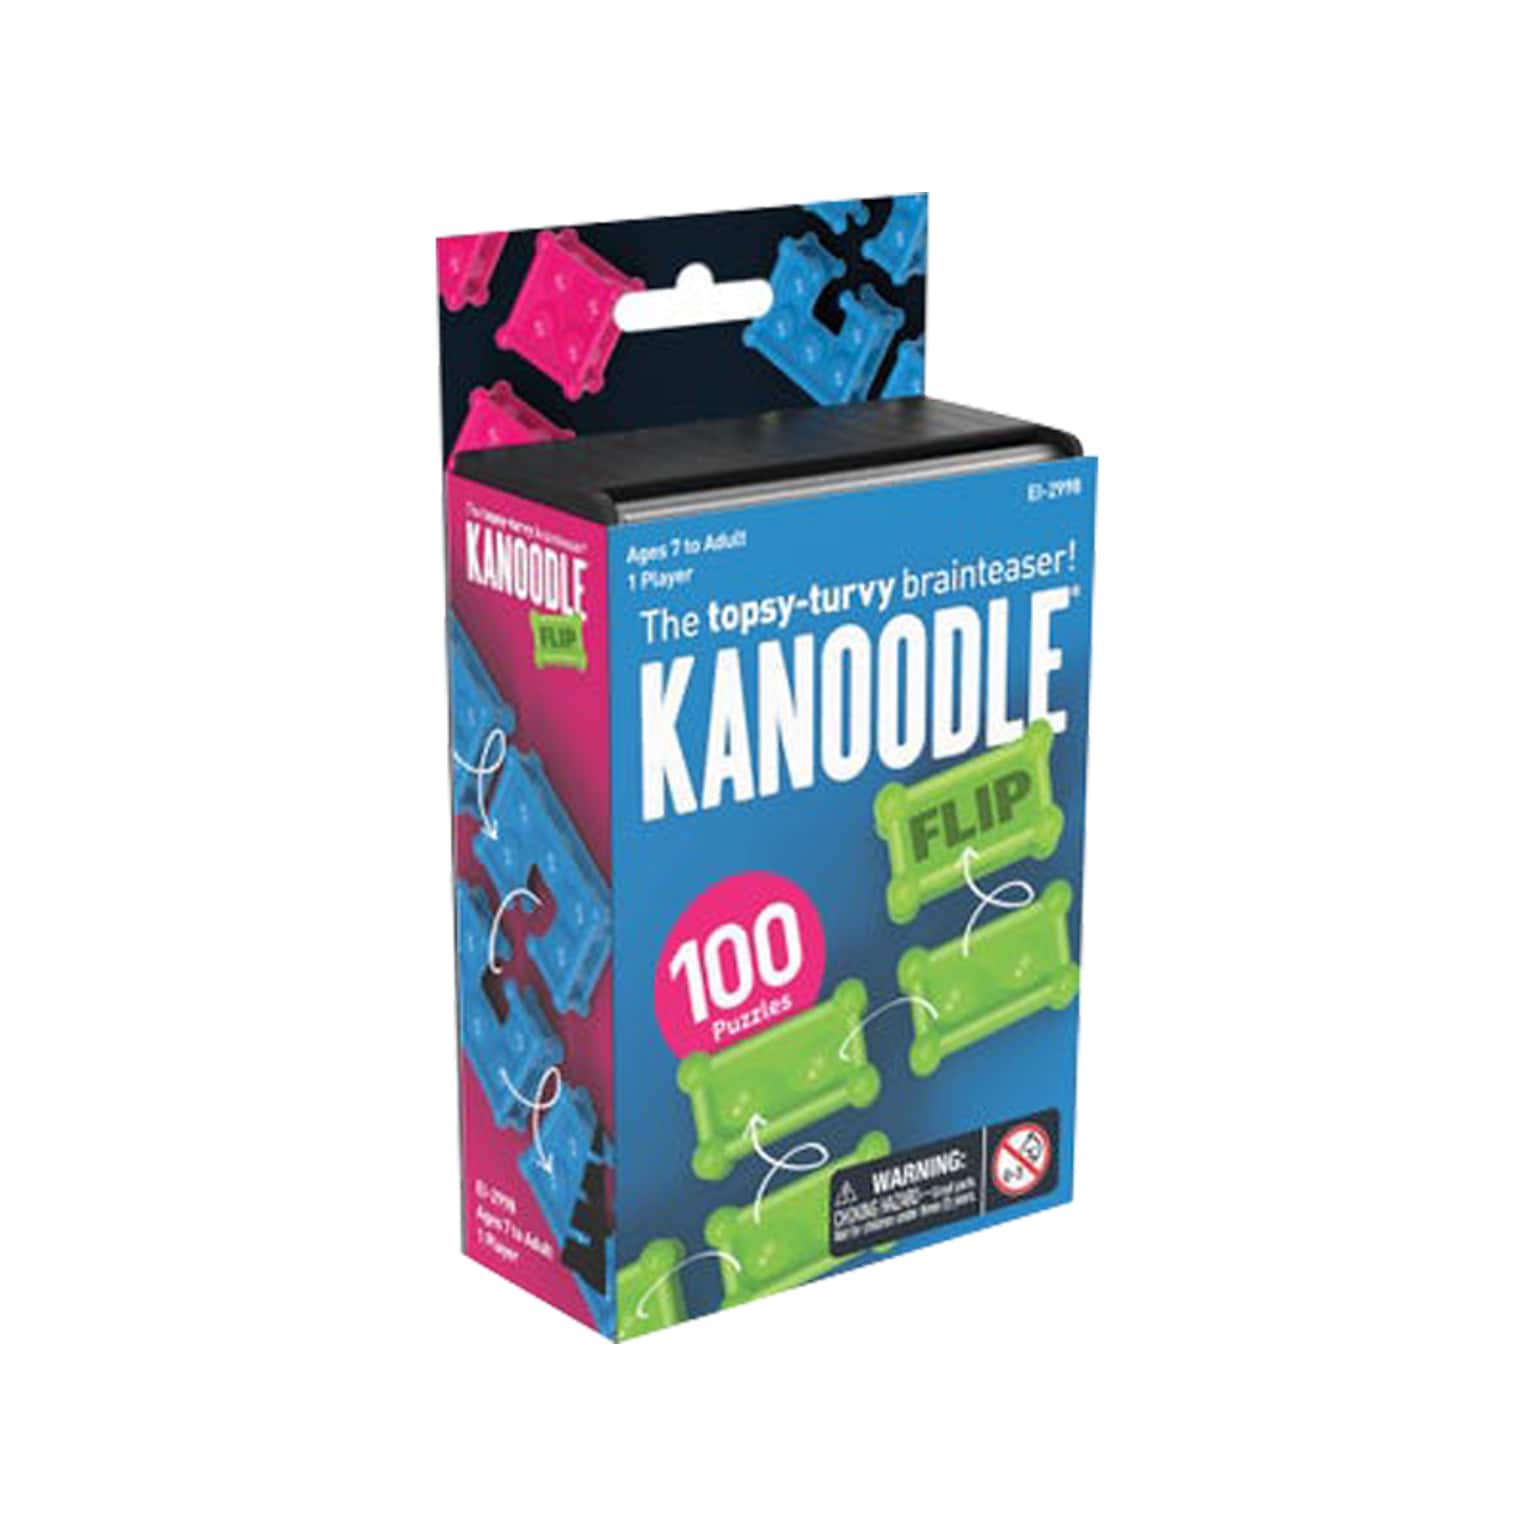 Educational Insights Kanoodle Flip 3-D Brain Teaser Puzzle Game for Kids, Teens And Adults, Ages 7+ (2998)